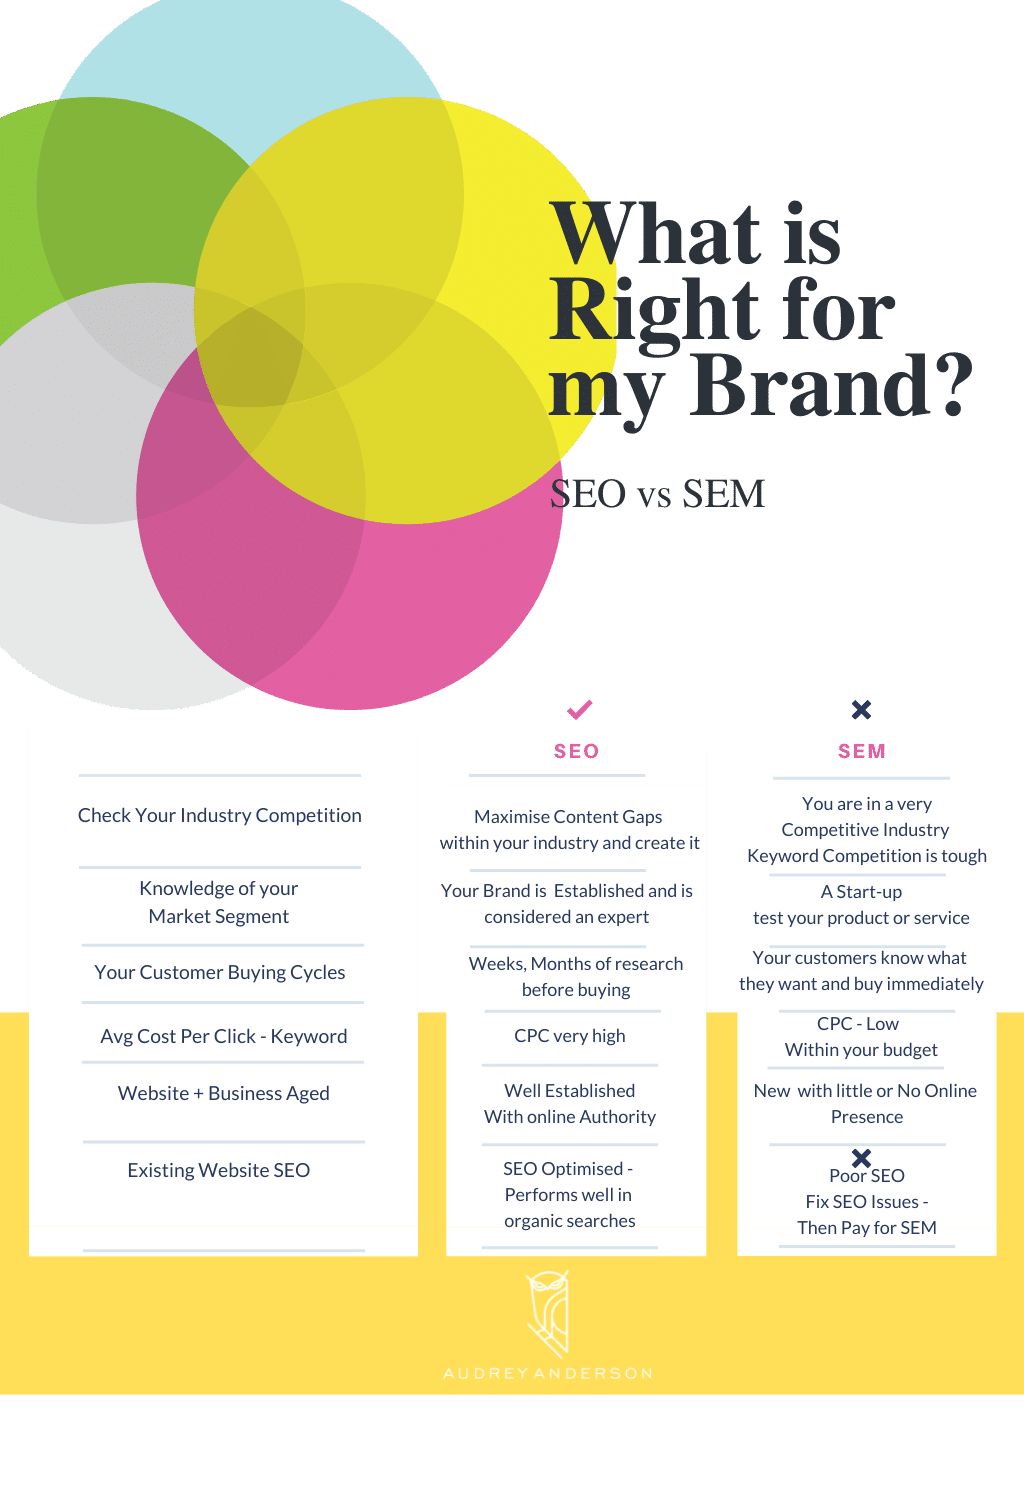 What is Right for my Brand Infographic SEO vs SEM